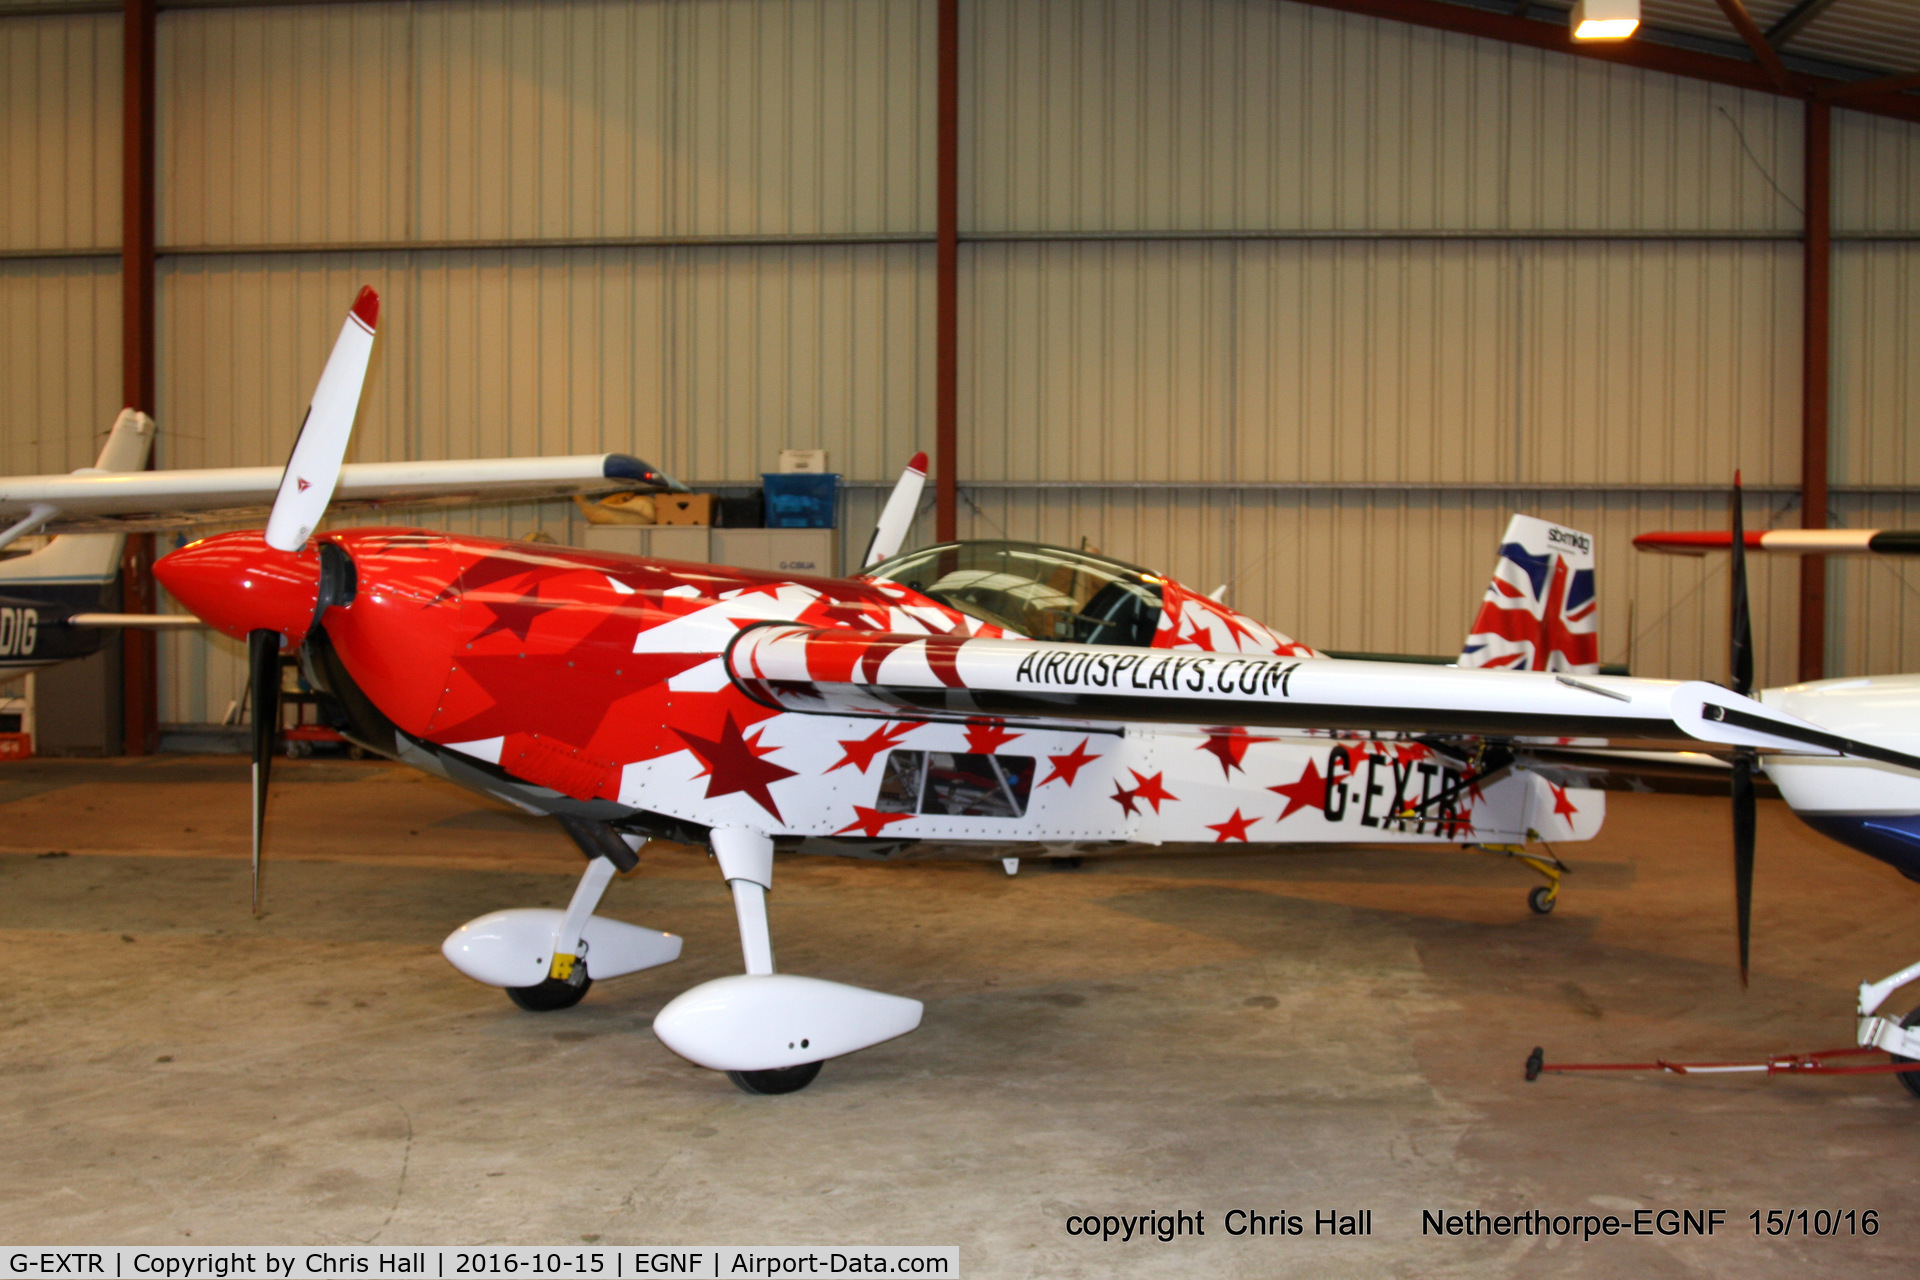 G-EXTR, 1990 Extra EA-260 C/N 004, now in the Global Stars Aerobatic Display Team new scheme